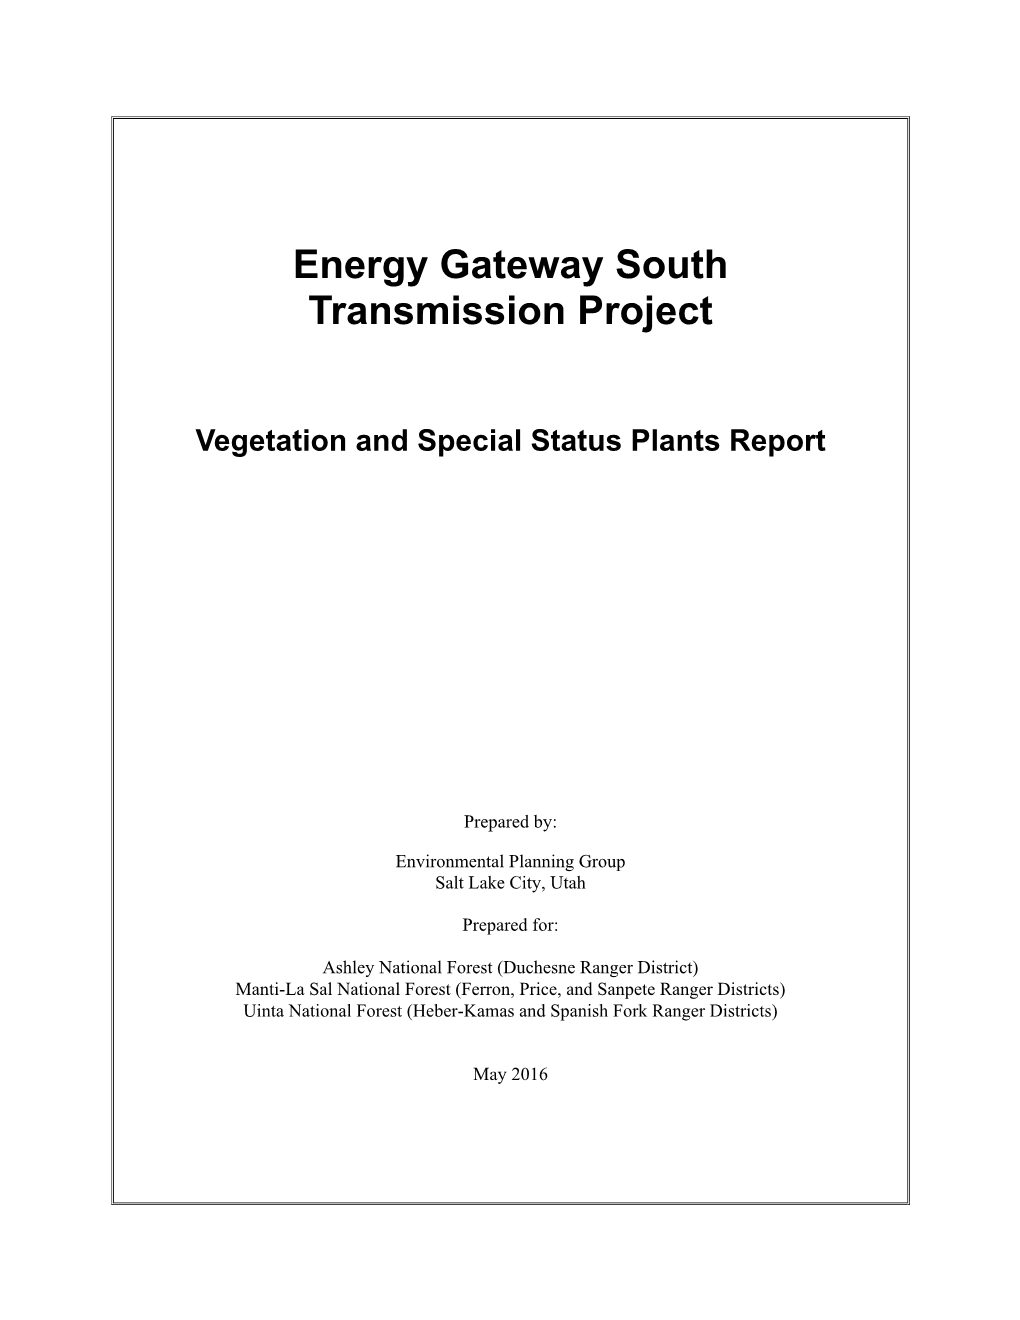 Energy Gateway South Transmission Project Vegetation and Special